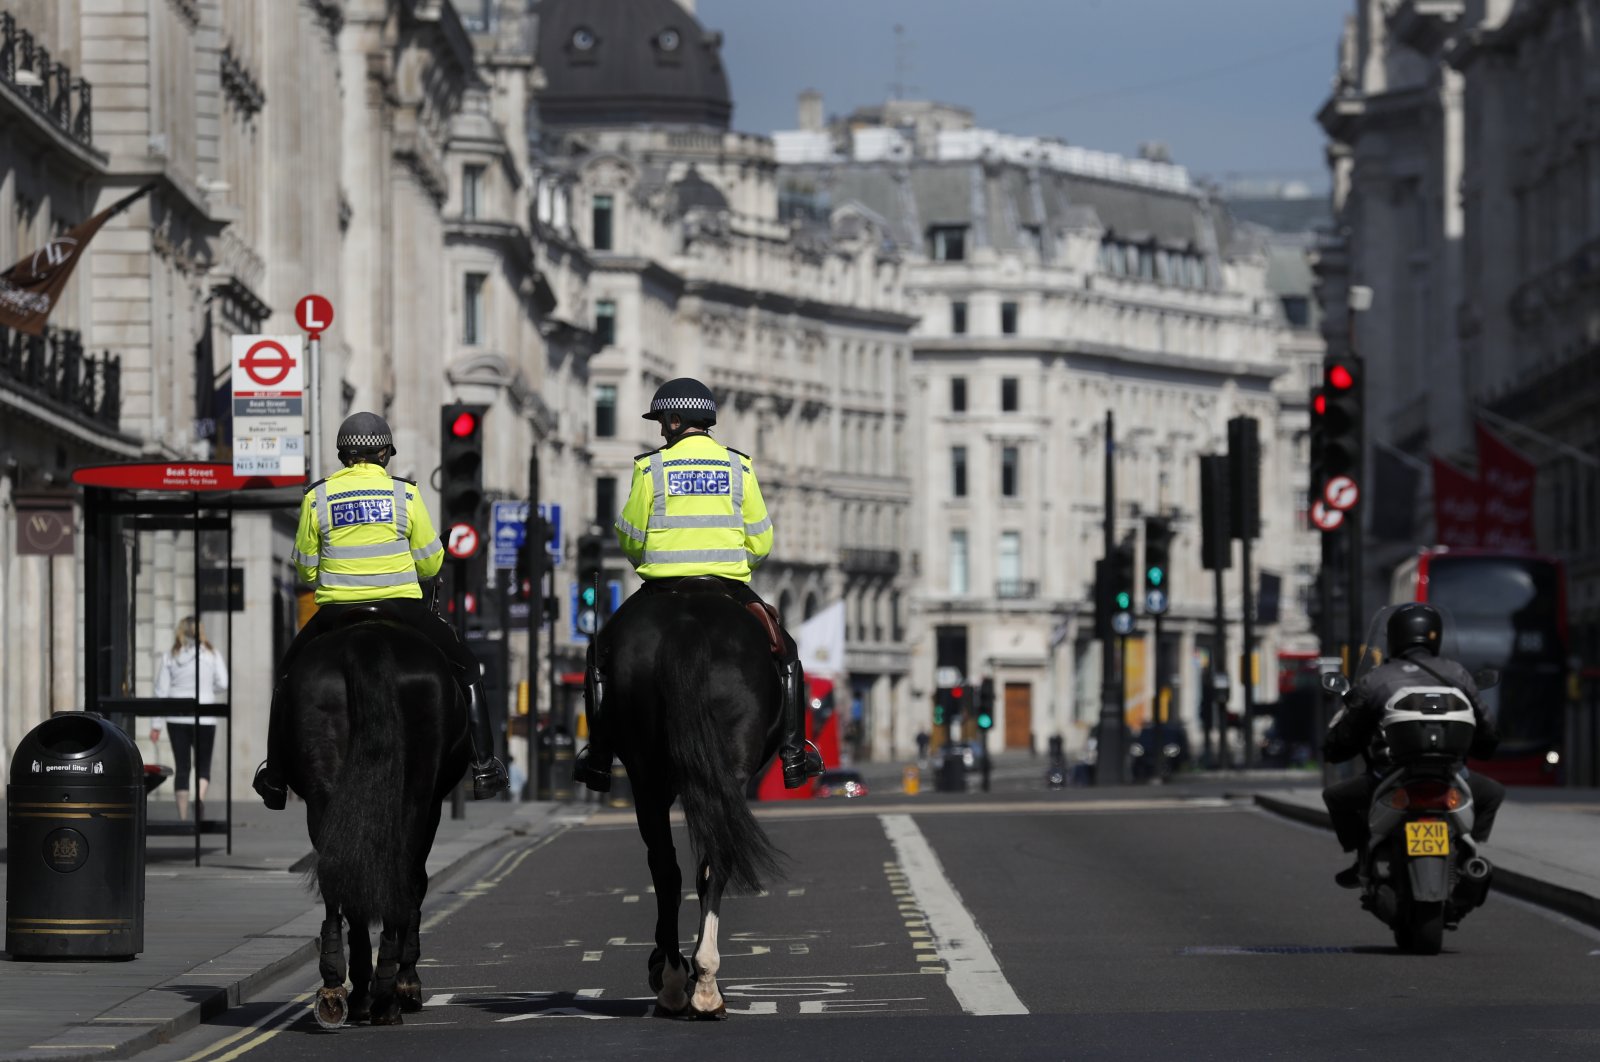 Mounted police officers patrol along a deserted Regent Street in London, as the U.K. is in lockdown to help curb the spread of the coronavirus, April 15, 2020. (AP Photo)